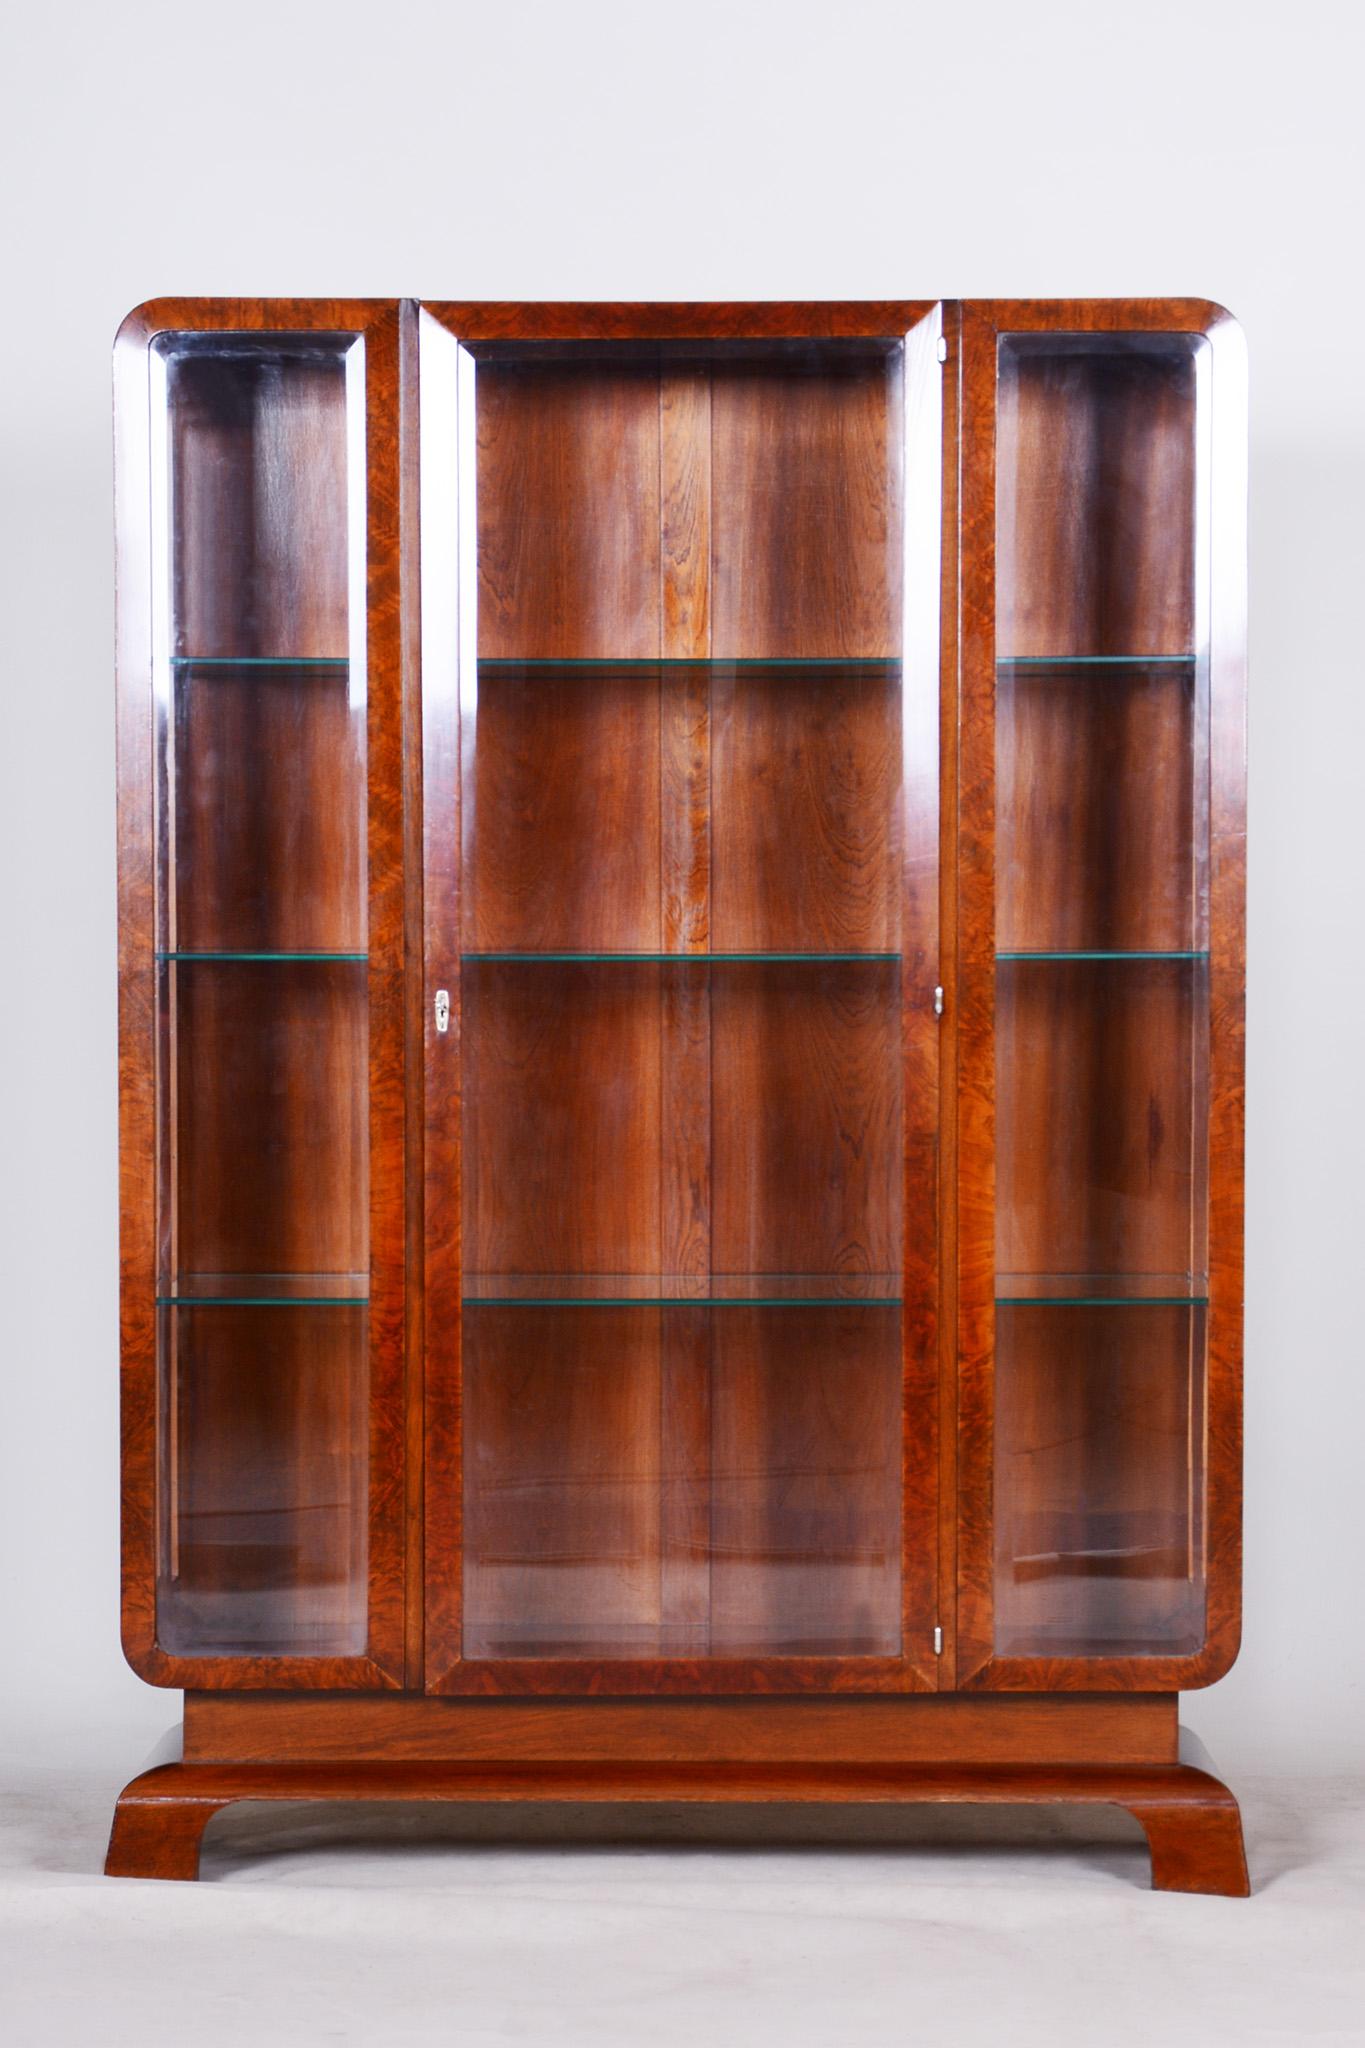 Restored Art Deco walnut display cabinet.

Source: Czechia
Period: 1930-1939
Material: Walnut

Revived original varnish.

This item features classic Art Deco elements. Art Deco is a style that originates from France in the early 20th